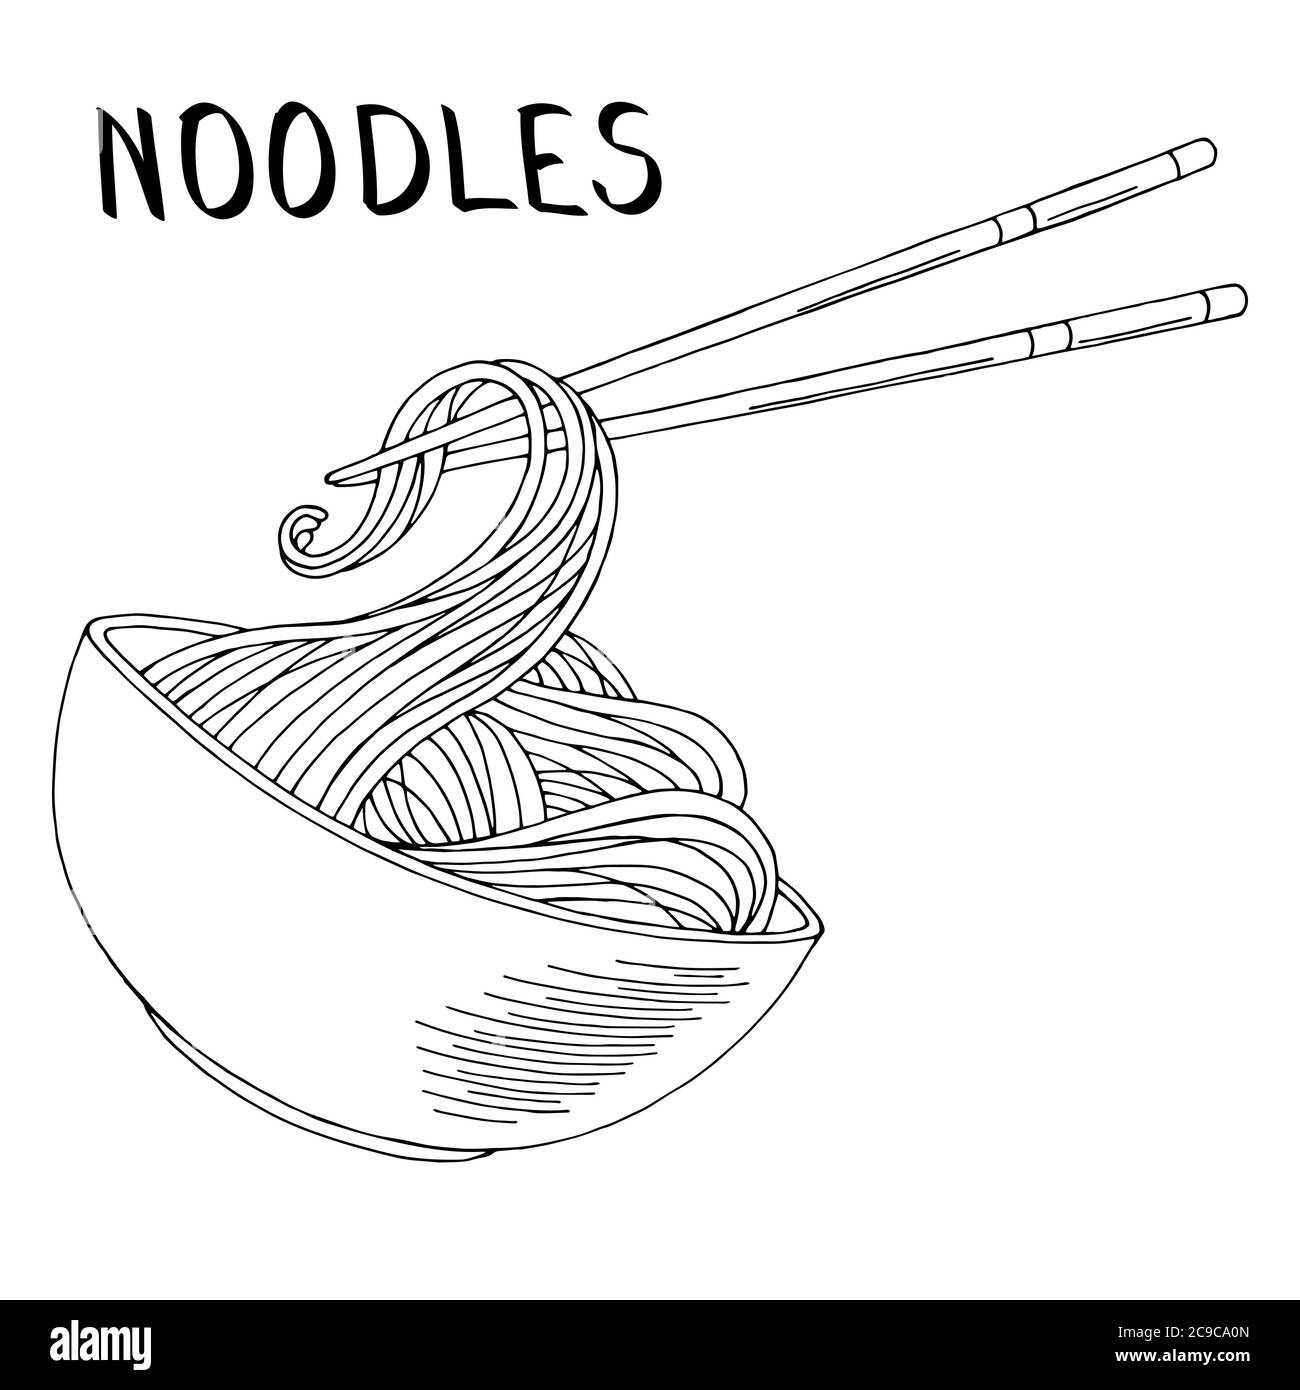 Bowl of noodles with a pair chopsticks sketch icon